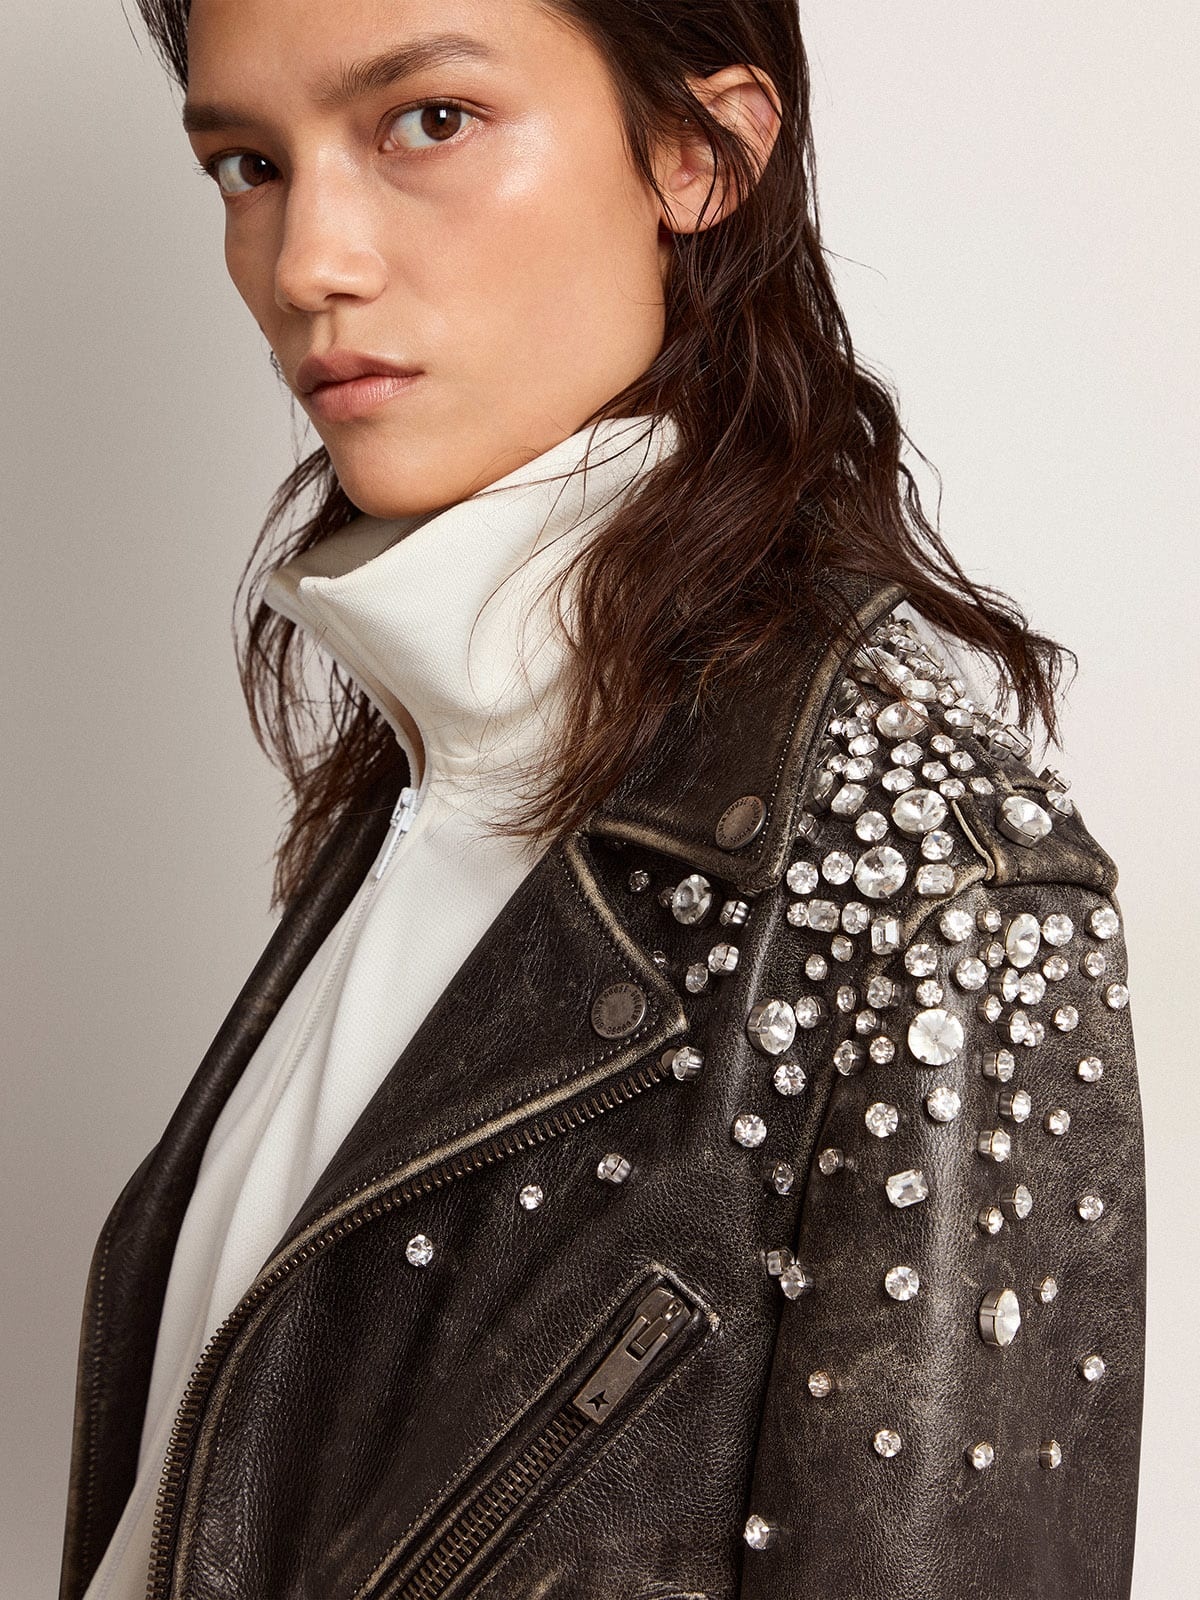 Women's biker jacket in distressed leather with cabochon crystals - 5